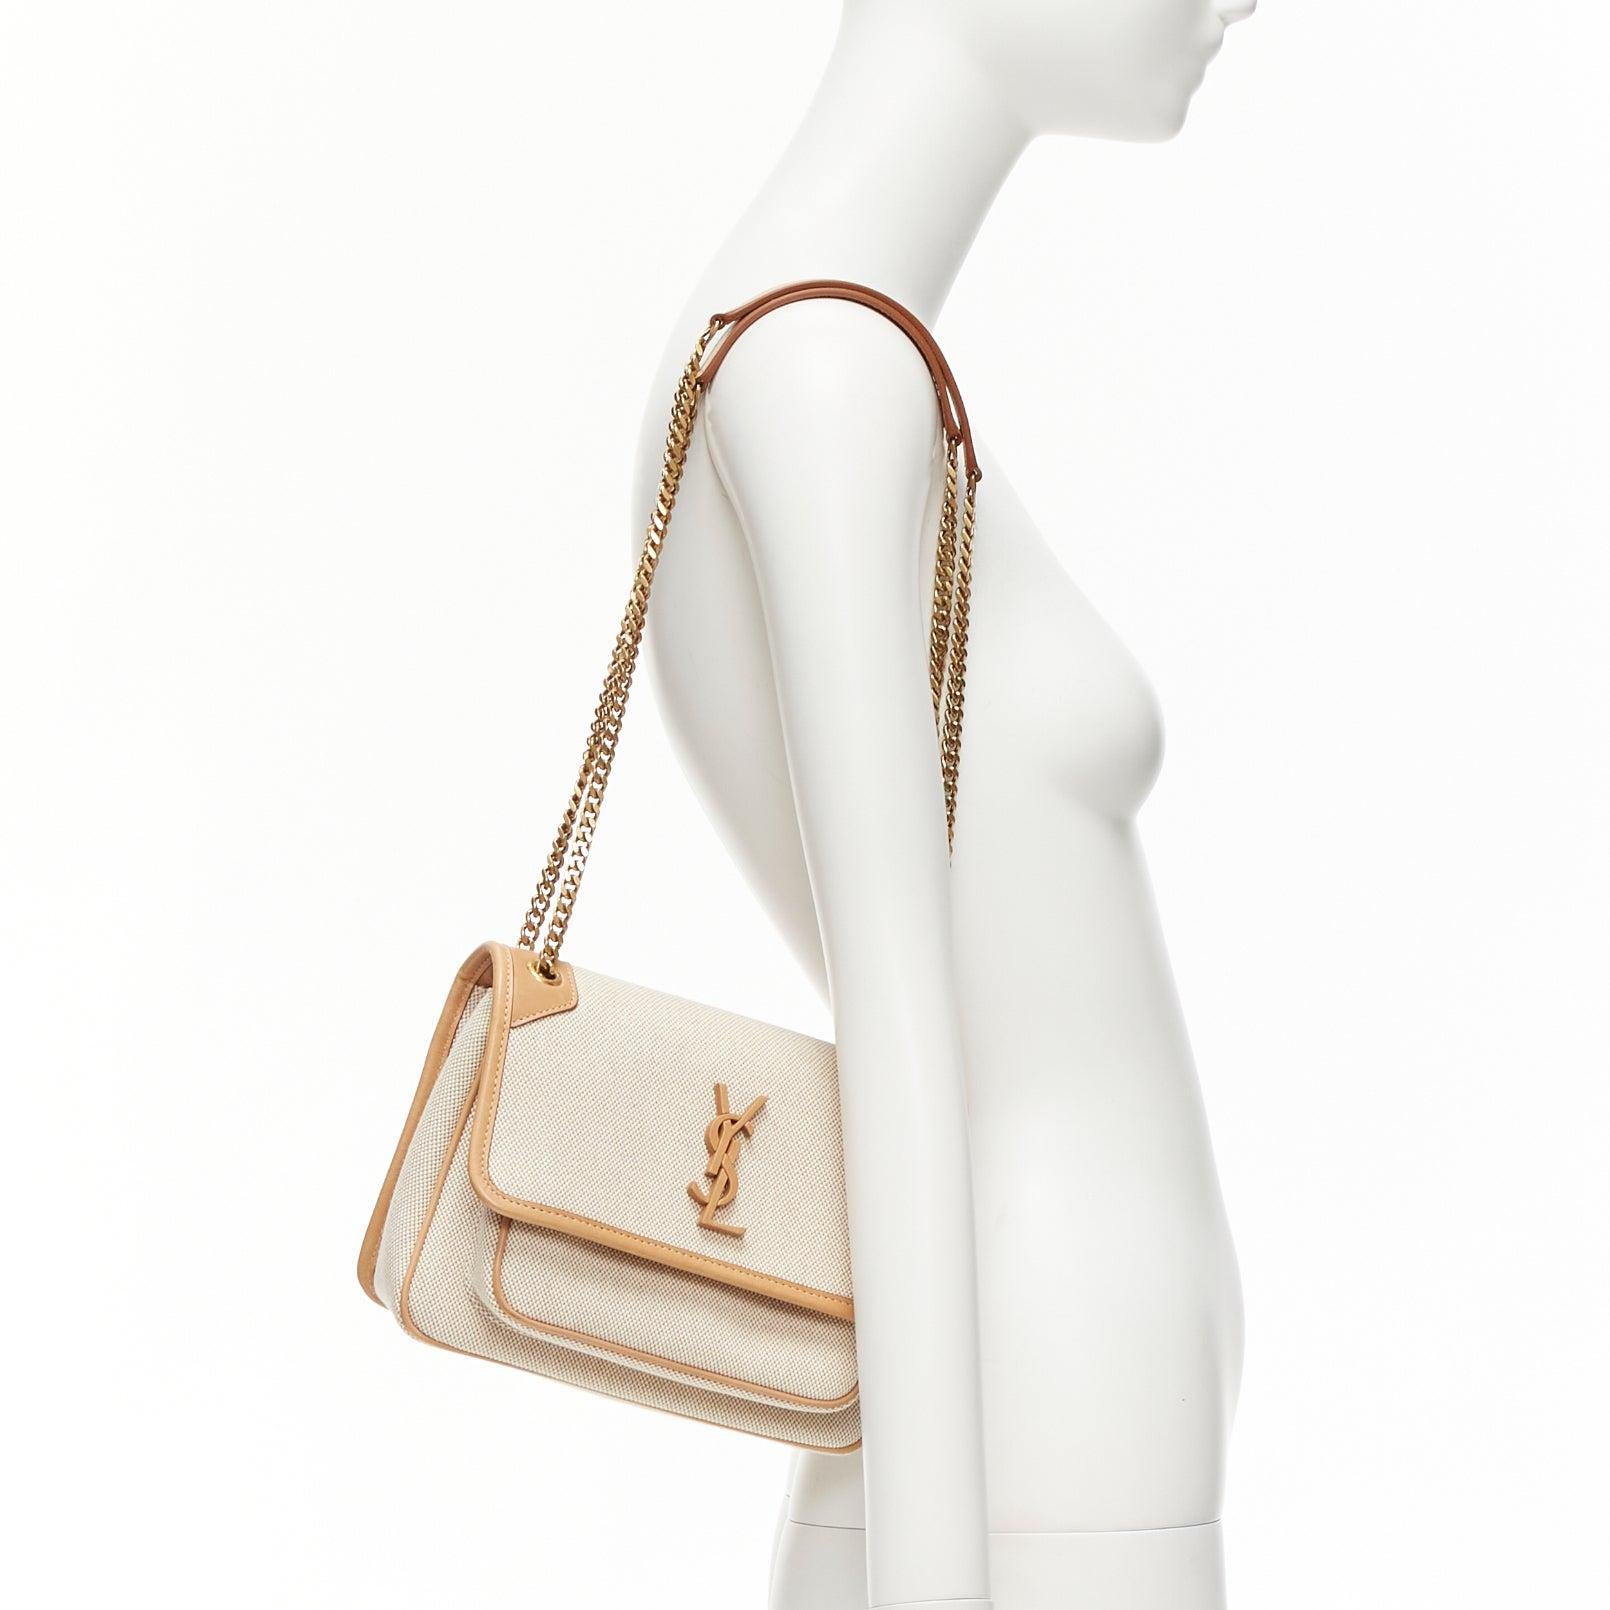 SAINT LAURENT Niki beige canvas brown leather trim logo flap crossbody chain bag
Reference: NILI/A00051
Brand: Saint Laurent
Model: Niki
Material: Leather, Canvas
Color: Beige, Brown
Pattern: Solid
Closure: Magnet
Lining: Khaki Fabric
Extra Details: